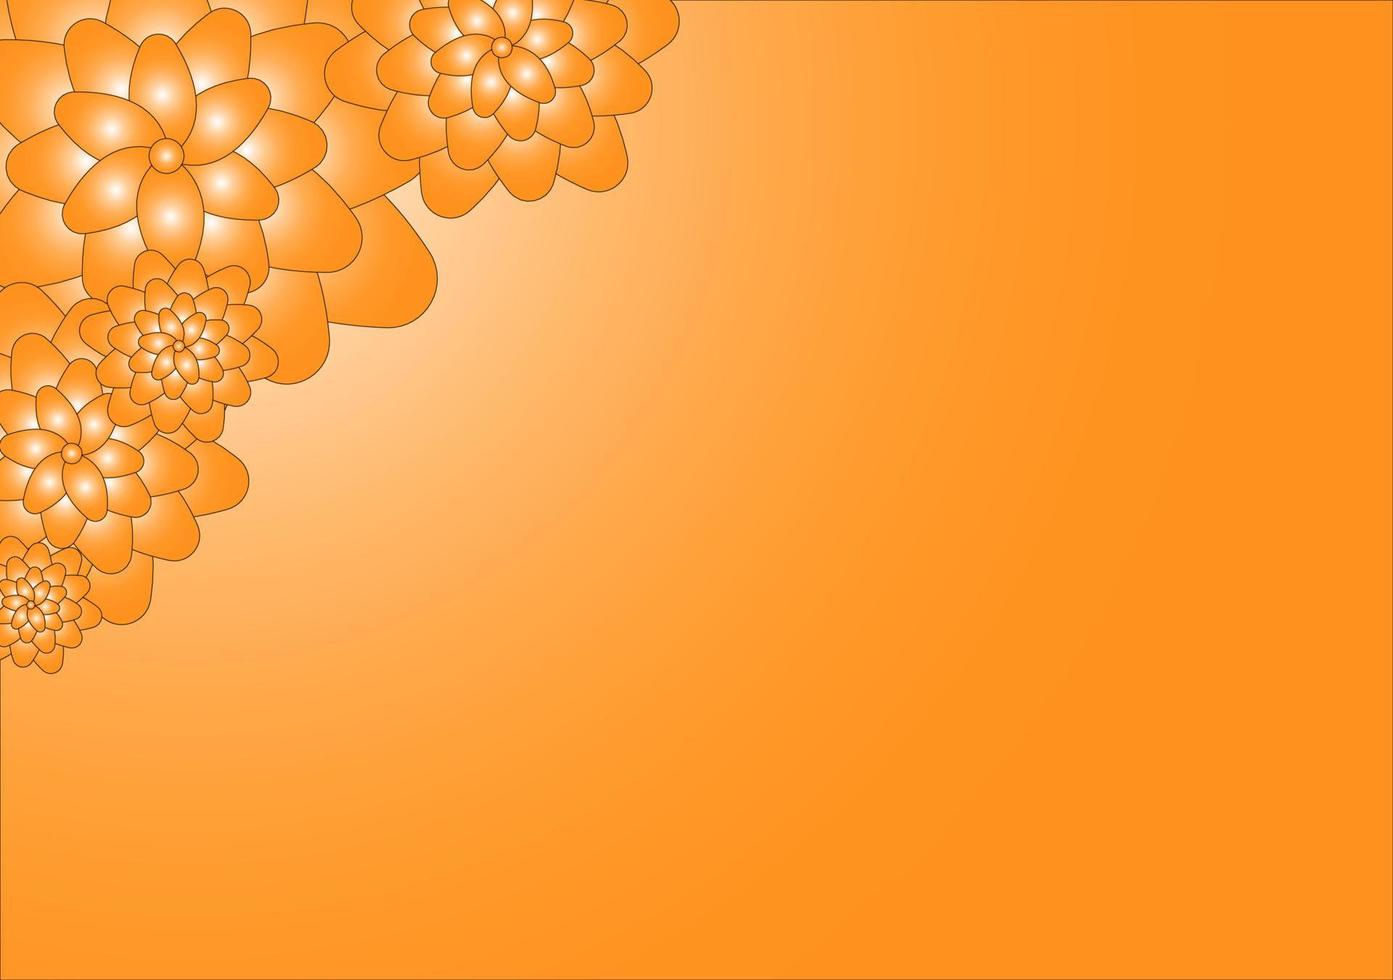 abstract floral luxury background with orange flowers vector